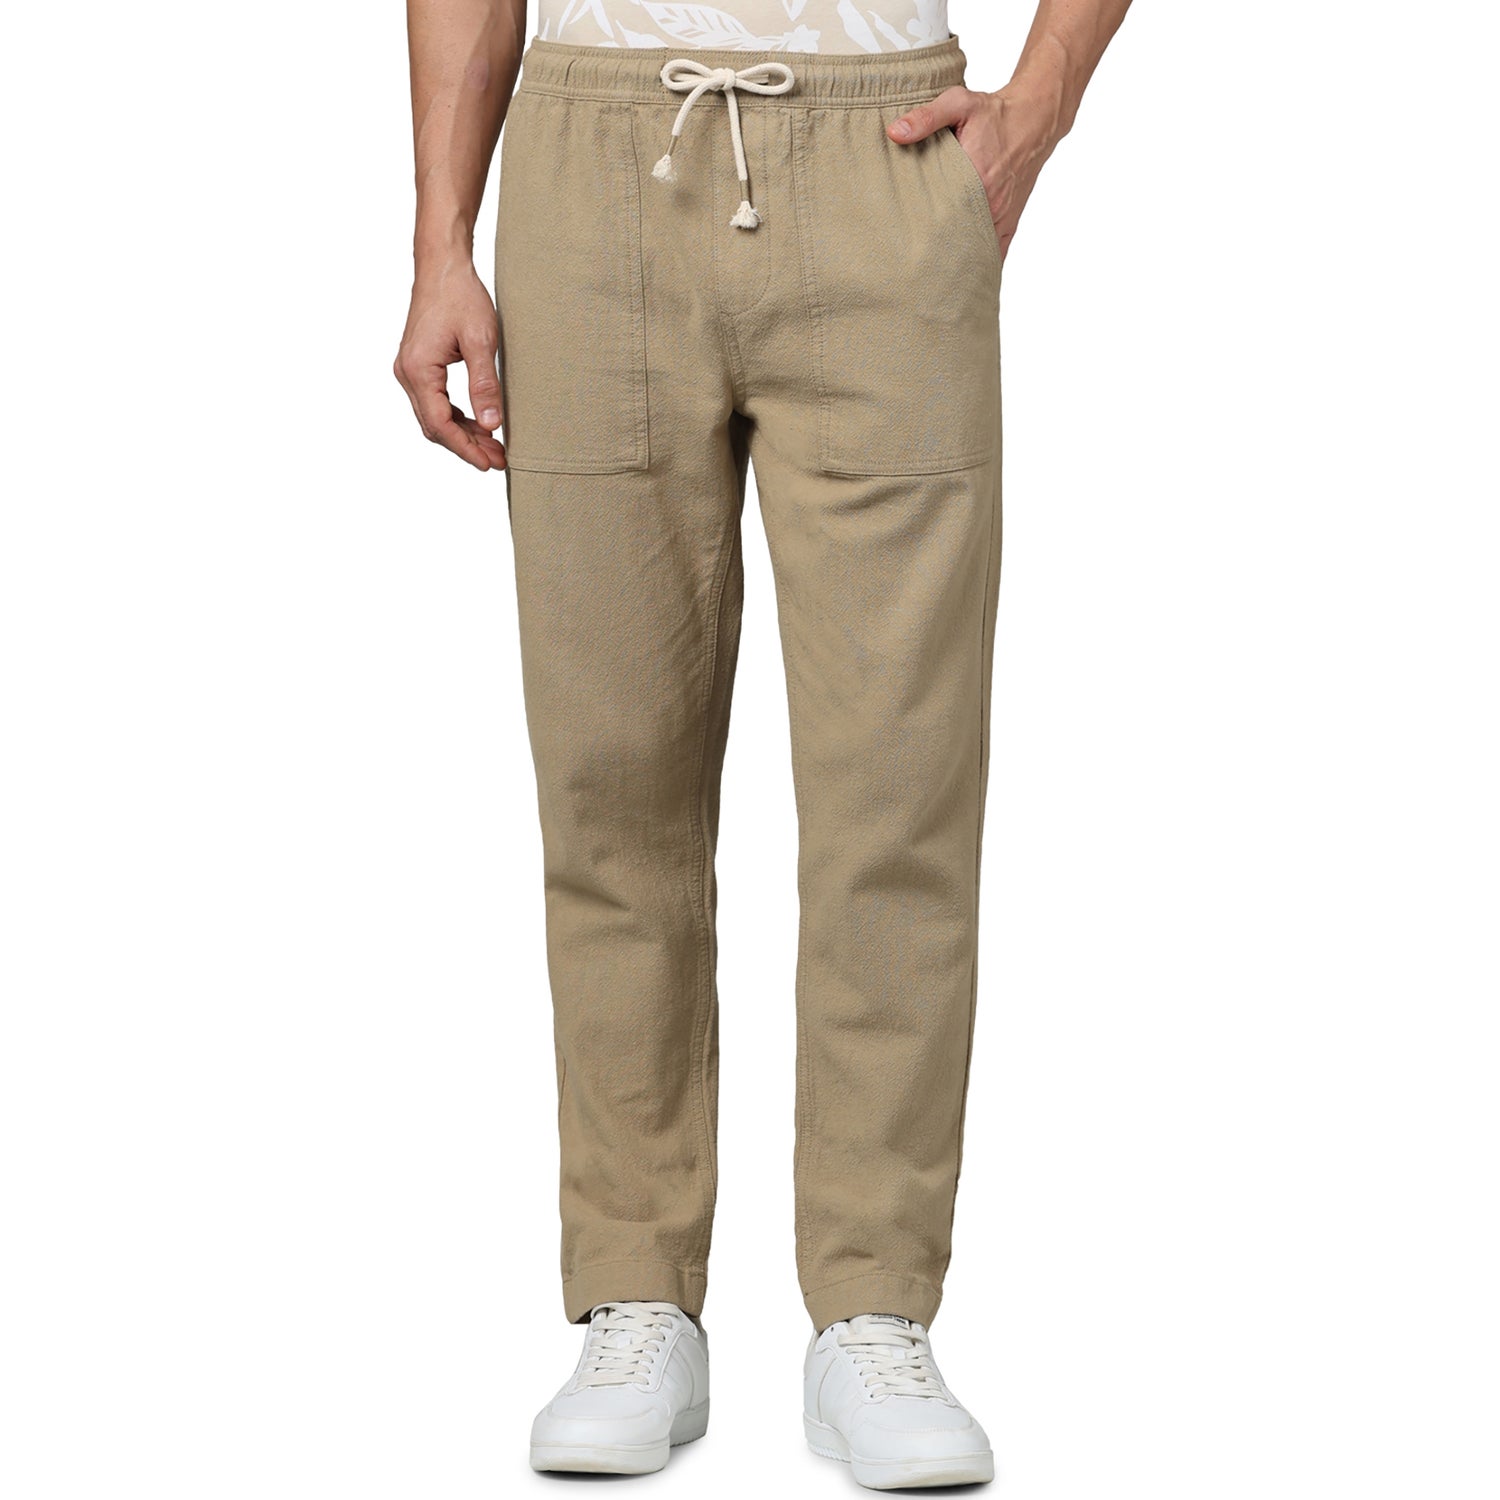 Men's Beige Solid Loose Fit Cotton Fashion Casual Trousers (GODIEGO)